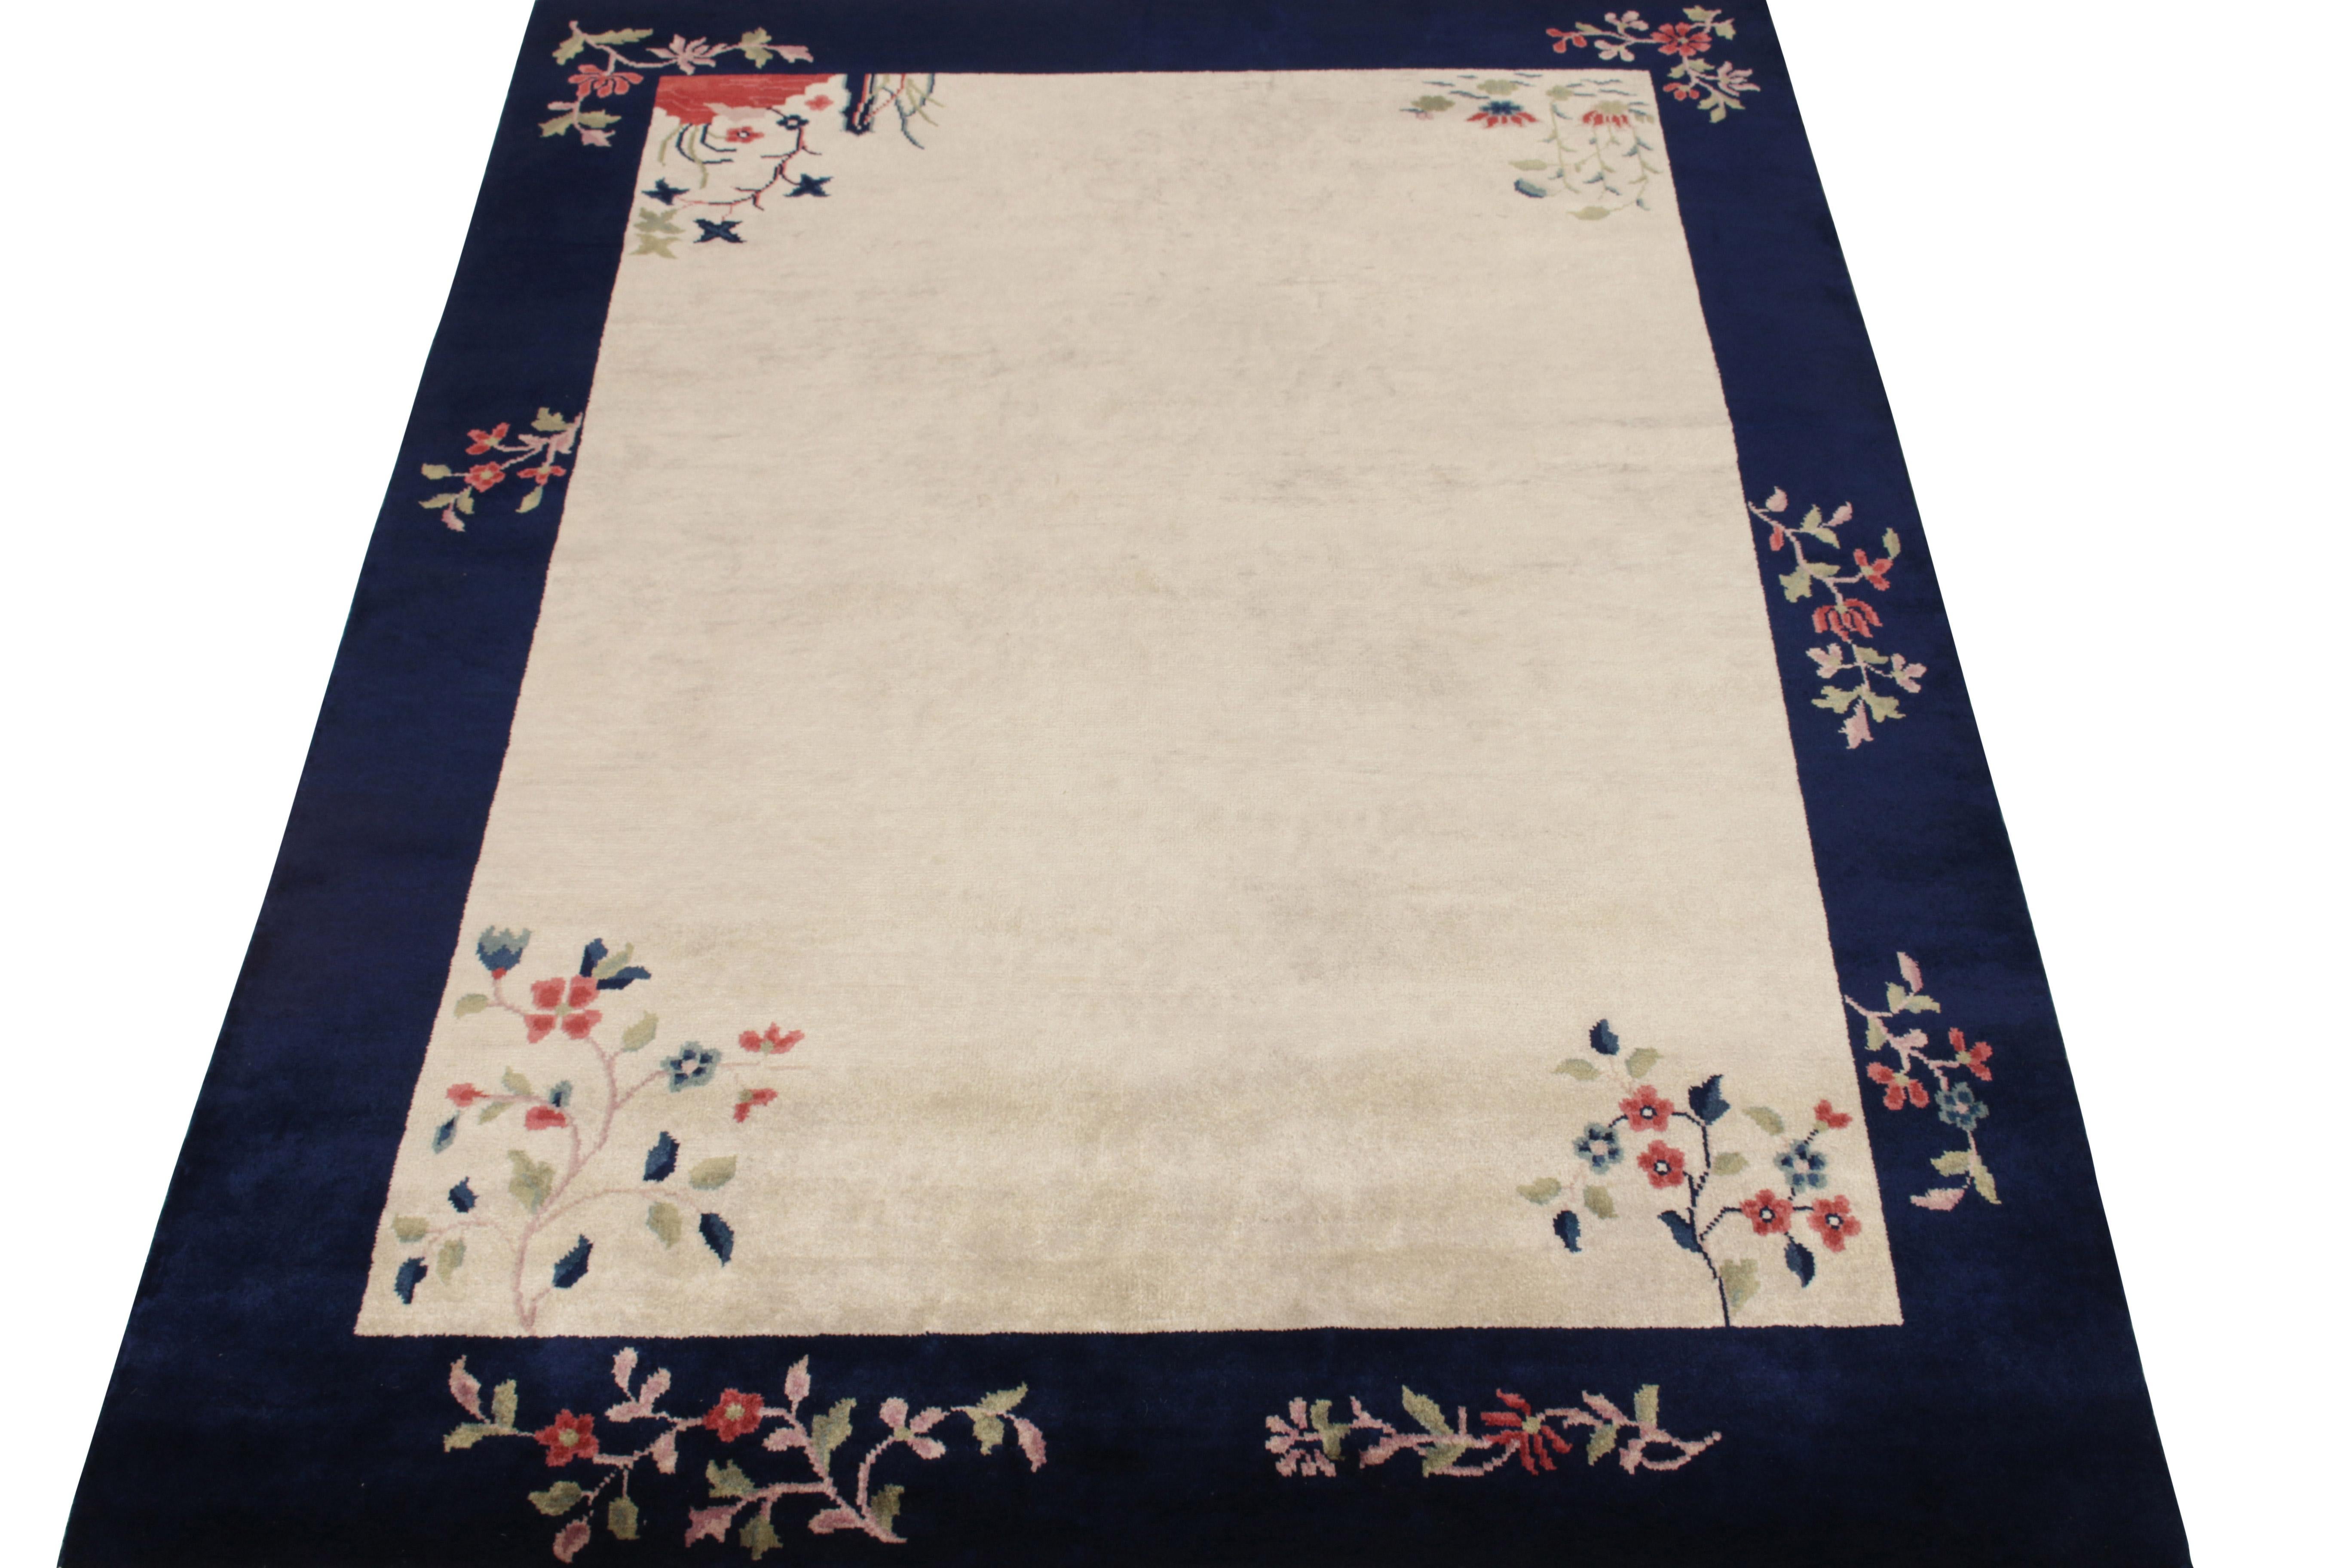 Carrying a healthy pile, this 6 x 8 vintage piece from Rug & Kilim’s Antique & Vintage collection celebrated delicate florals and open field style in the coveted Chinese art deco sensibilities of the 1920s. Hand-knotted in wool, the off white field